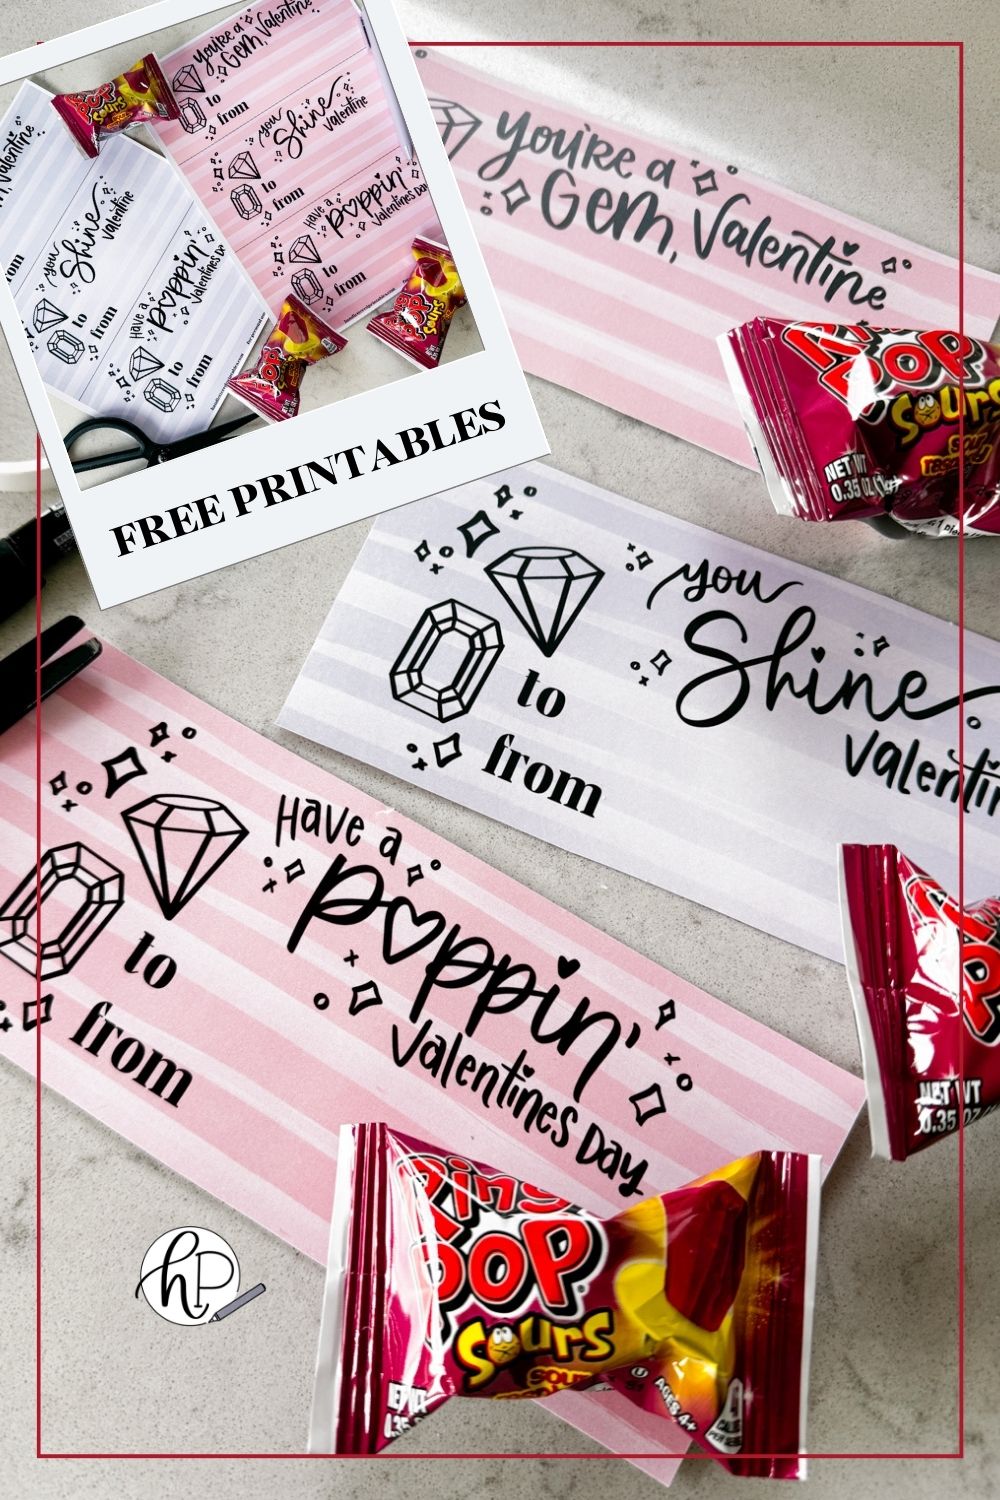 image of printed valentines with a gem theme, designed to pair with ring pops. printed and cut to size on a marble counter shown with ring pops in packaging for each valentine card hand lettered valentines in both pink and purple read:' you're a gem, valentine', 'you shine, valentine', and 'have a poppin' valentine's day' image overlay reads 'free printables' and shows printables before they are cut from the full sheets